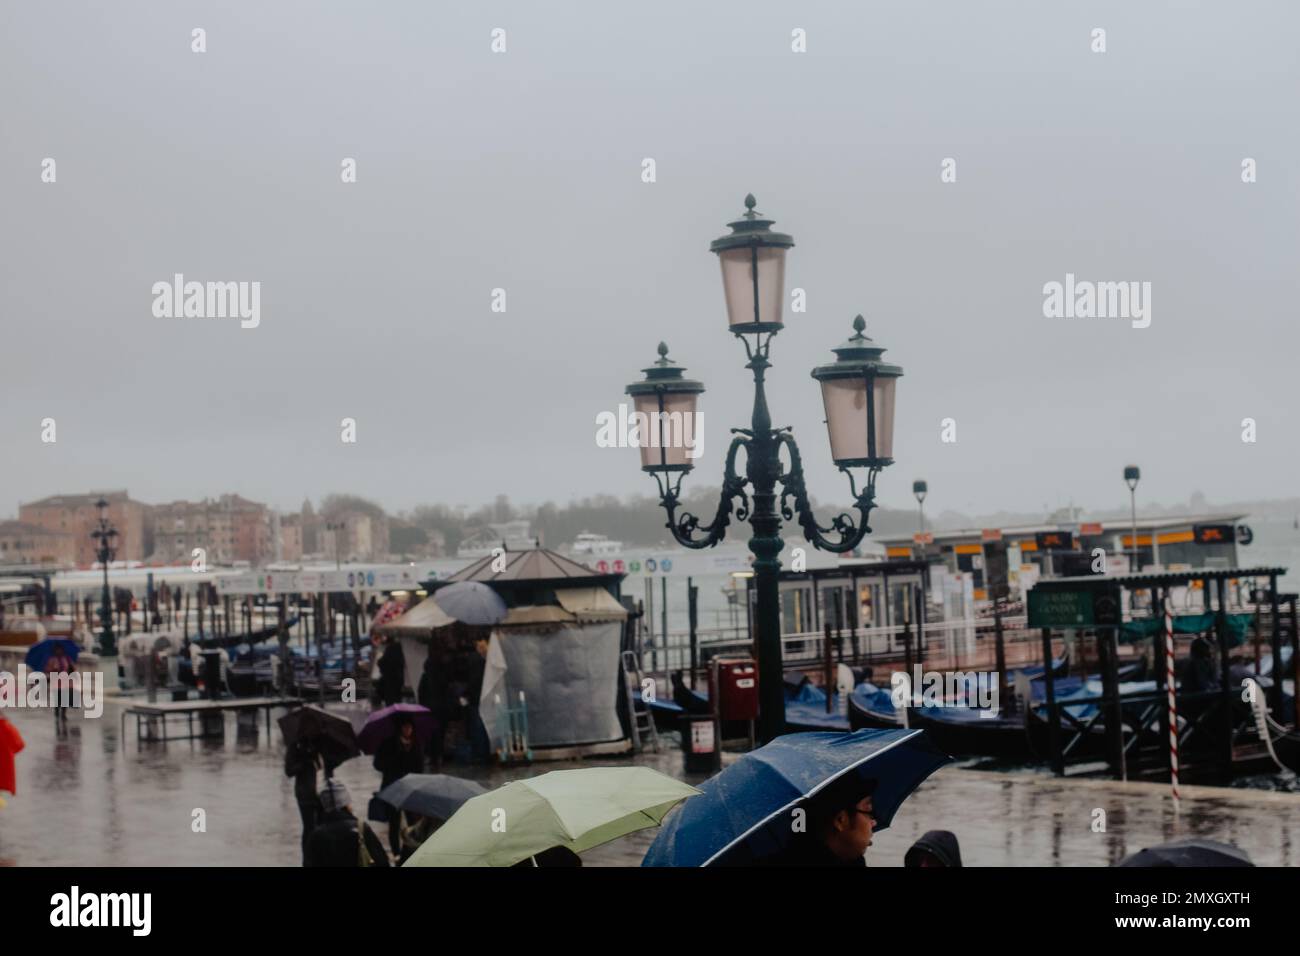 STRASBOURG, FRANCE - SEP 21, 2014: White Mercedes-Benz E Class taxi parked  on a rainy day in center of Strasbourg, place Kleber next to cafe Stock  Photo - Alamy